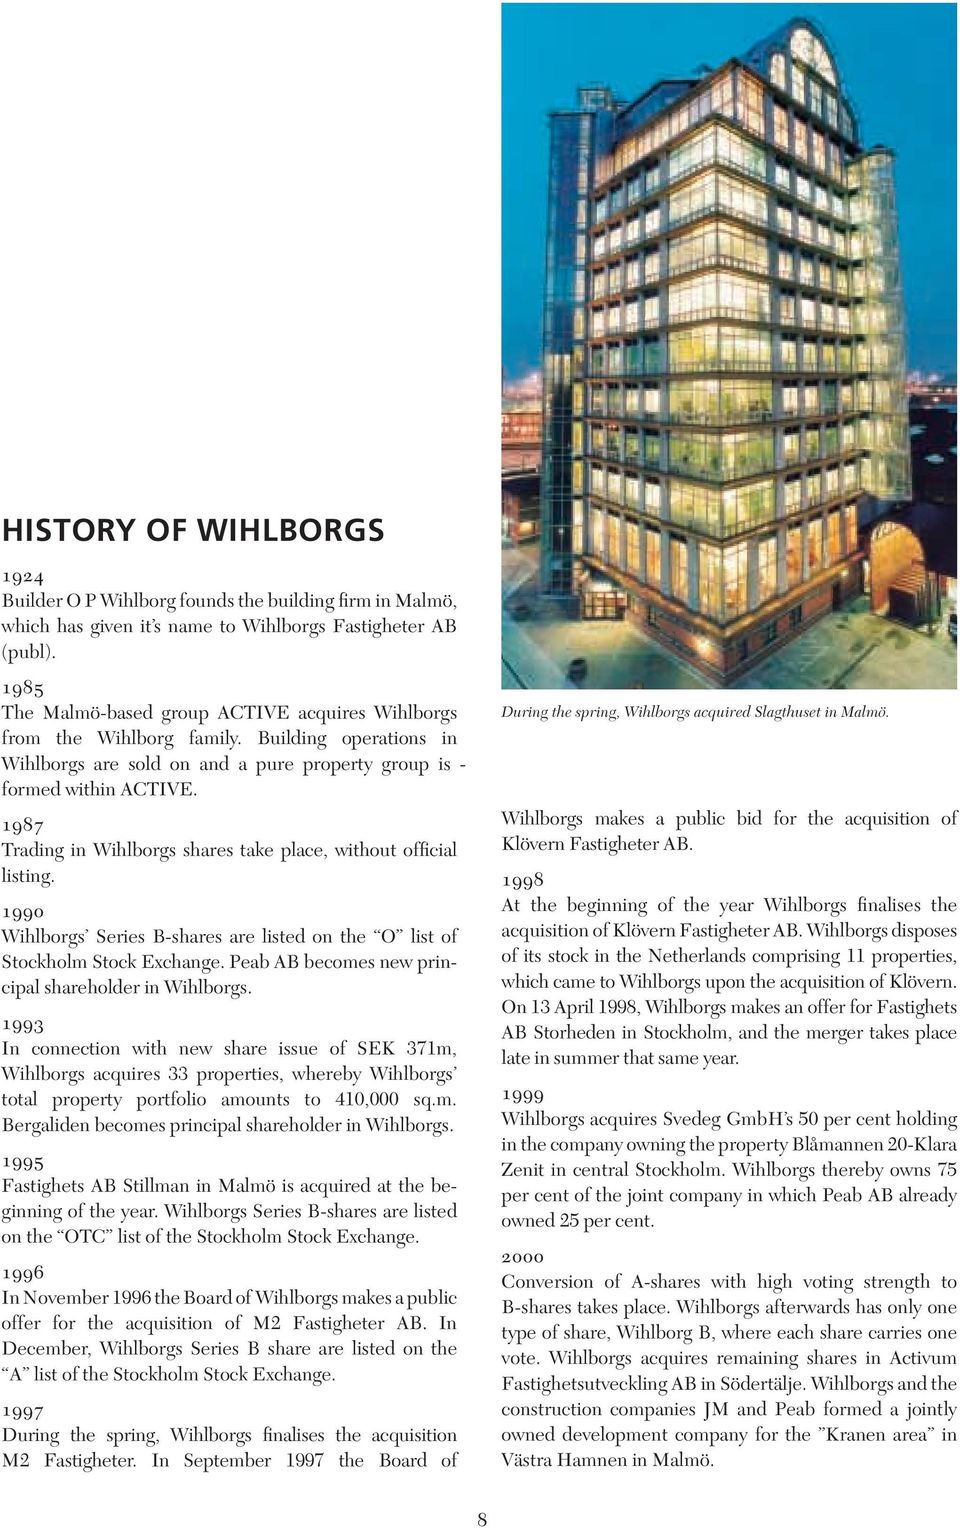 1987 Trading in Wihlborgs shares take place, without official listing. 1990 Wihlborgs Series B-shares are listed on the O list of Stockholm Stock Exchange.